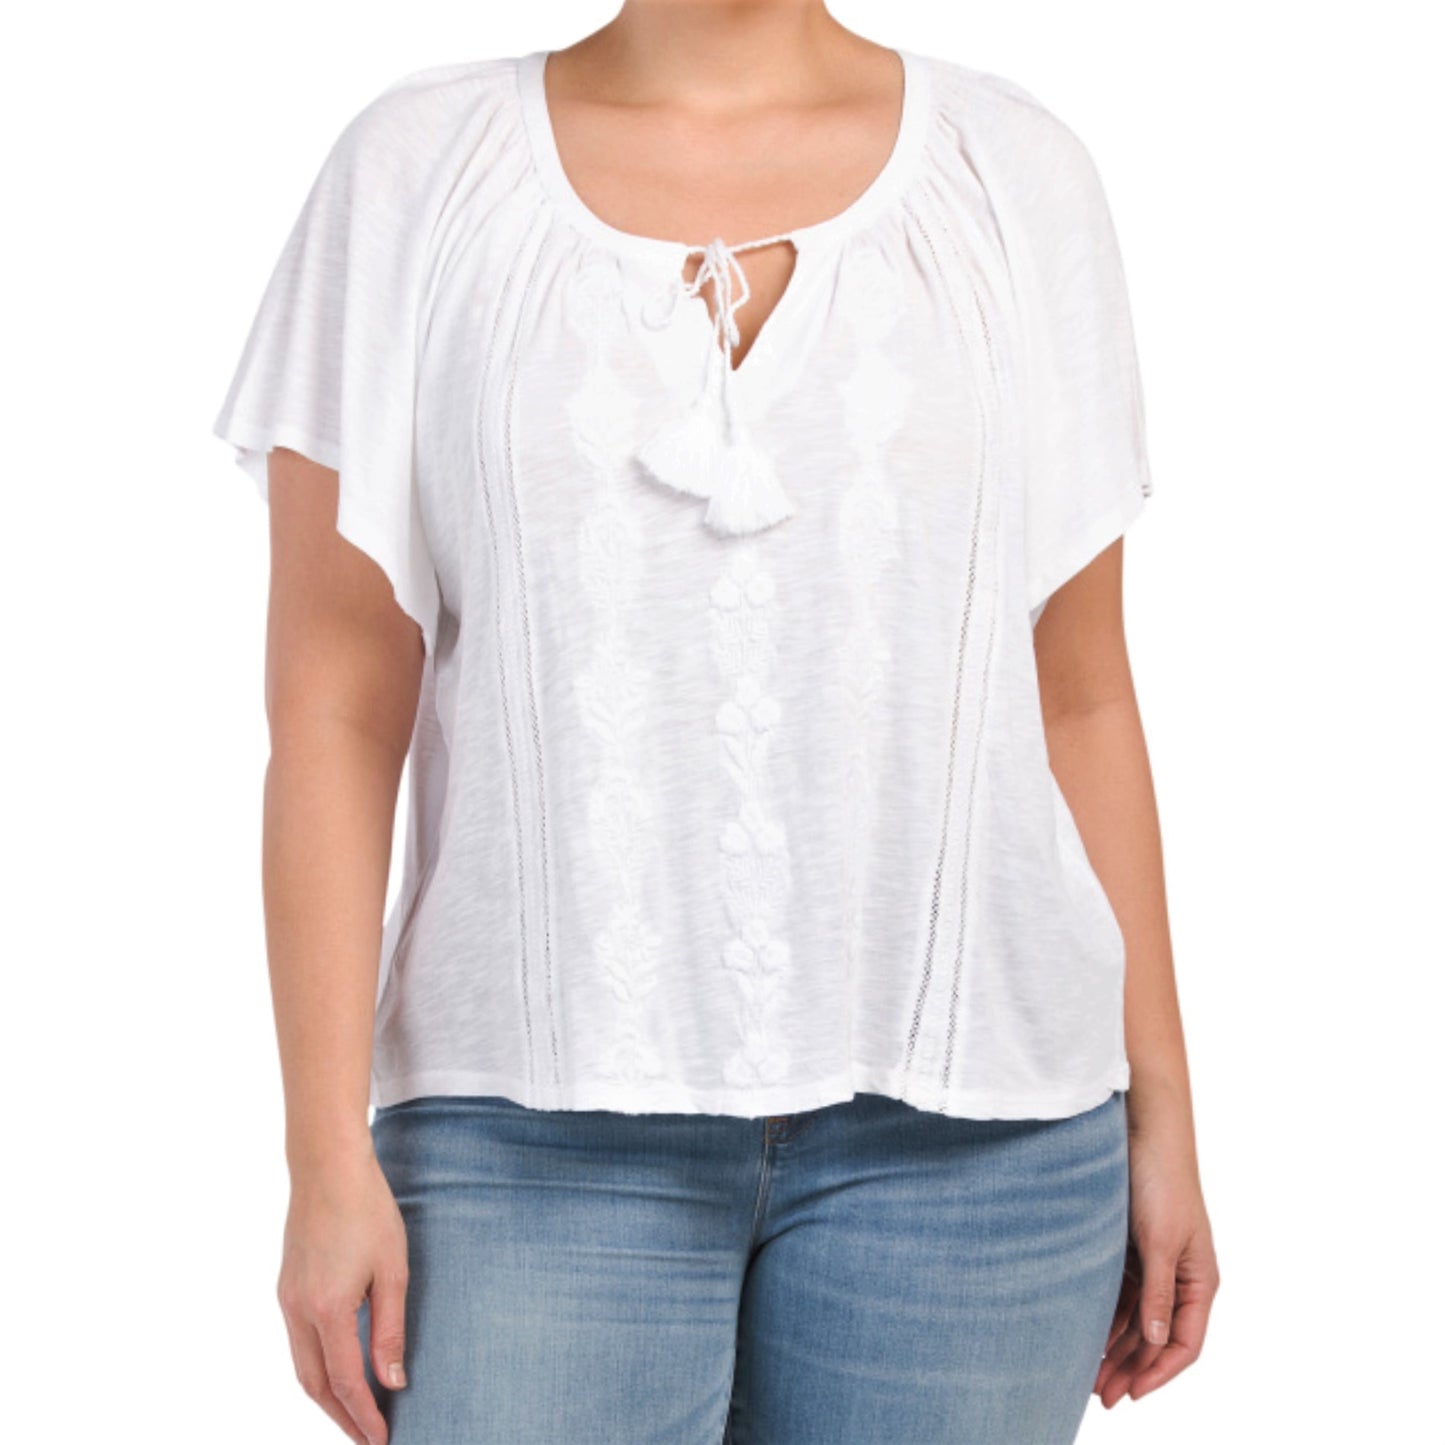 Lucky Brand Women's Plus Tie Neck Embroidered Lightweight Cotton Peasant Top